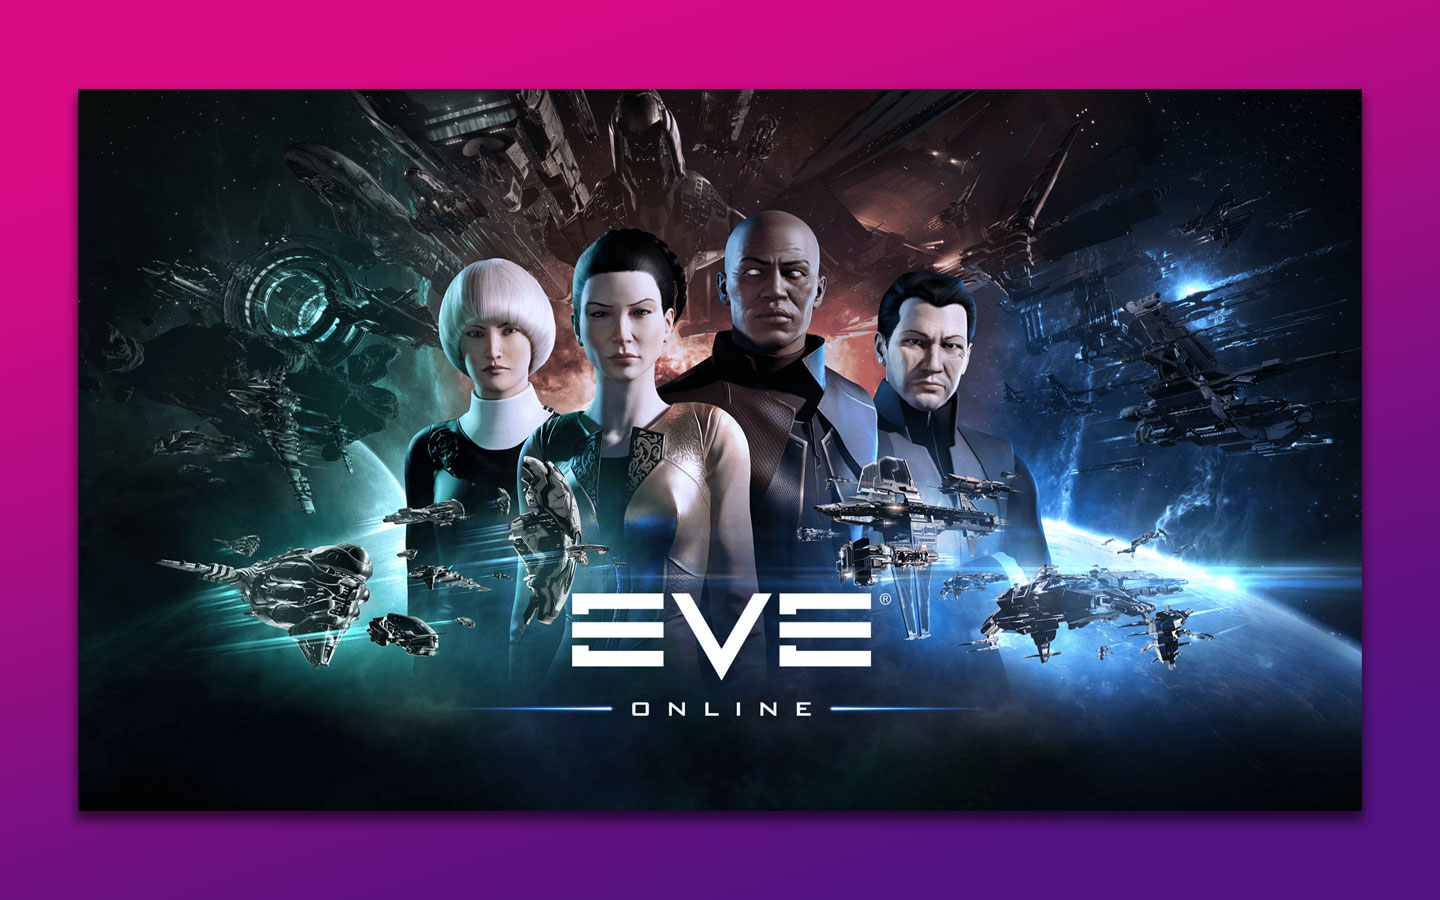 Best Free Games For Mac - Eve Online